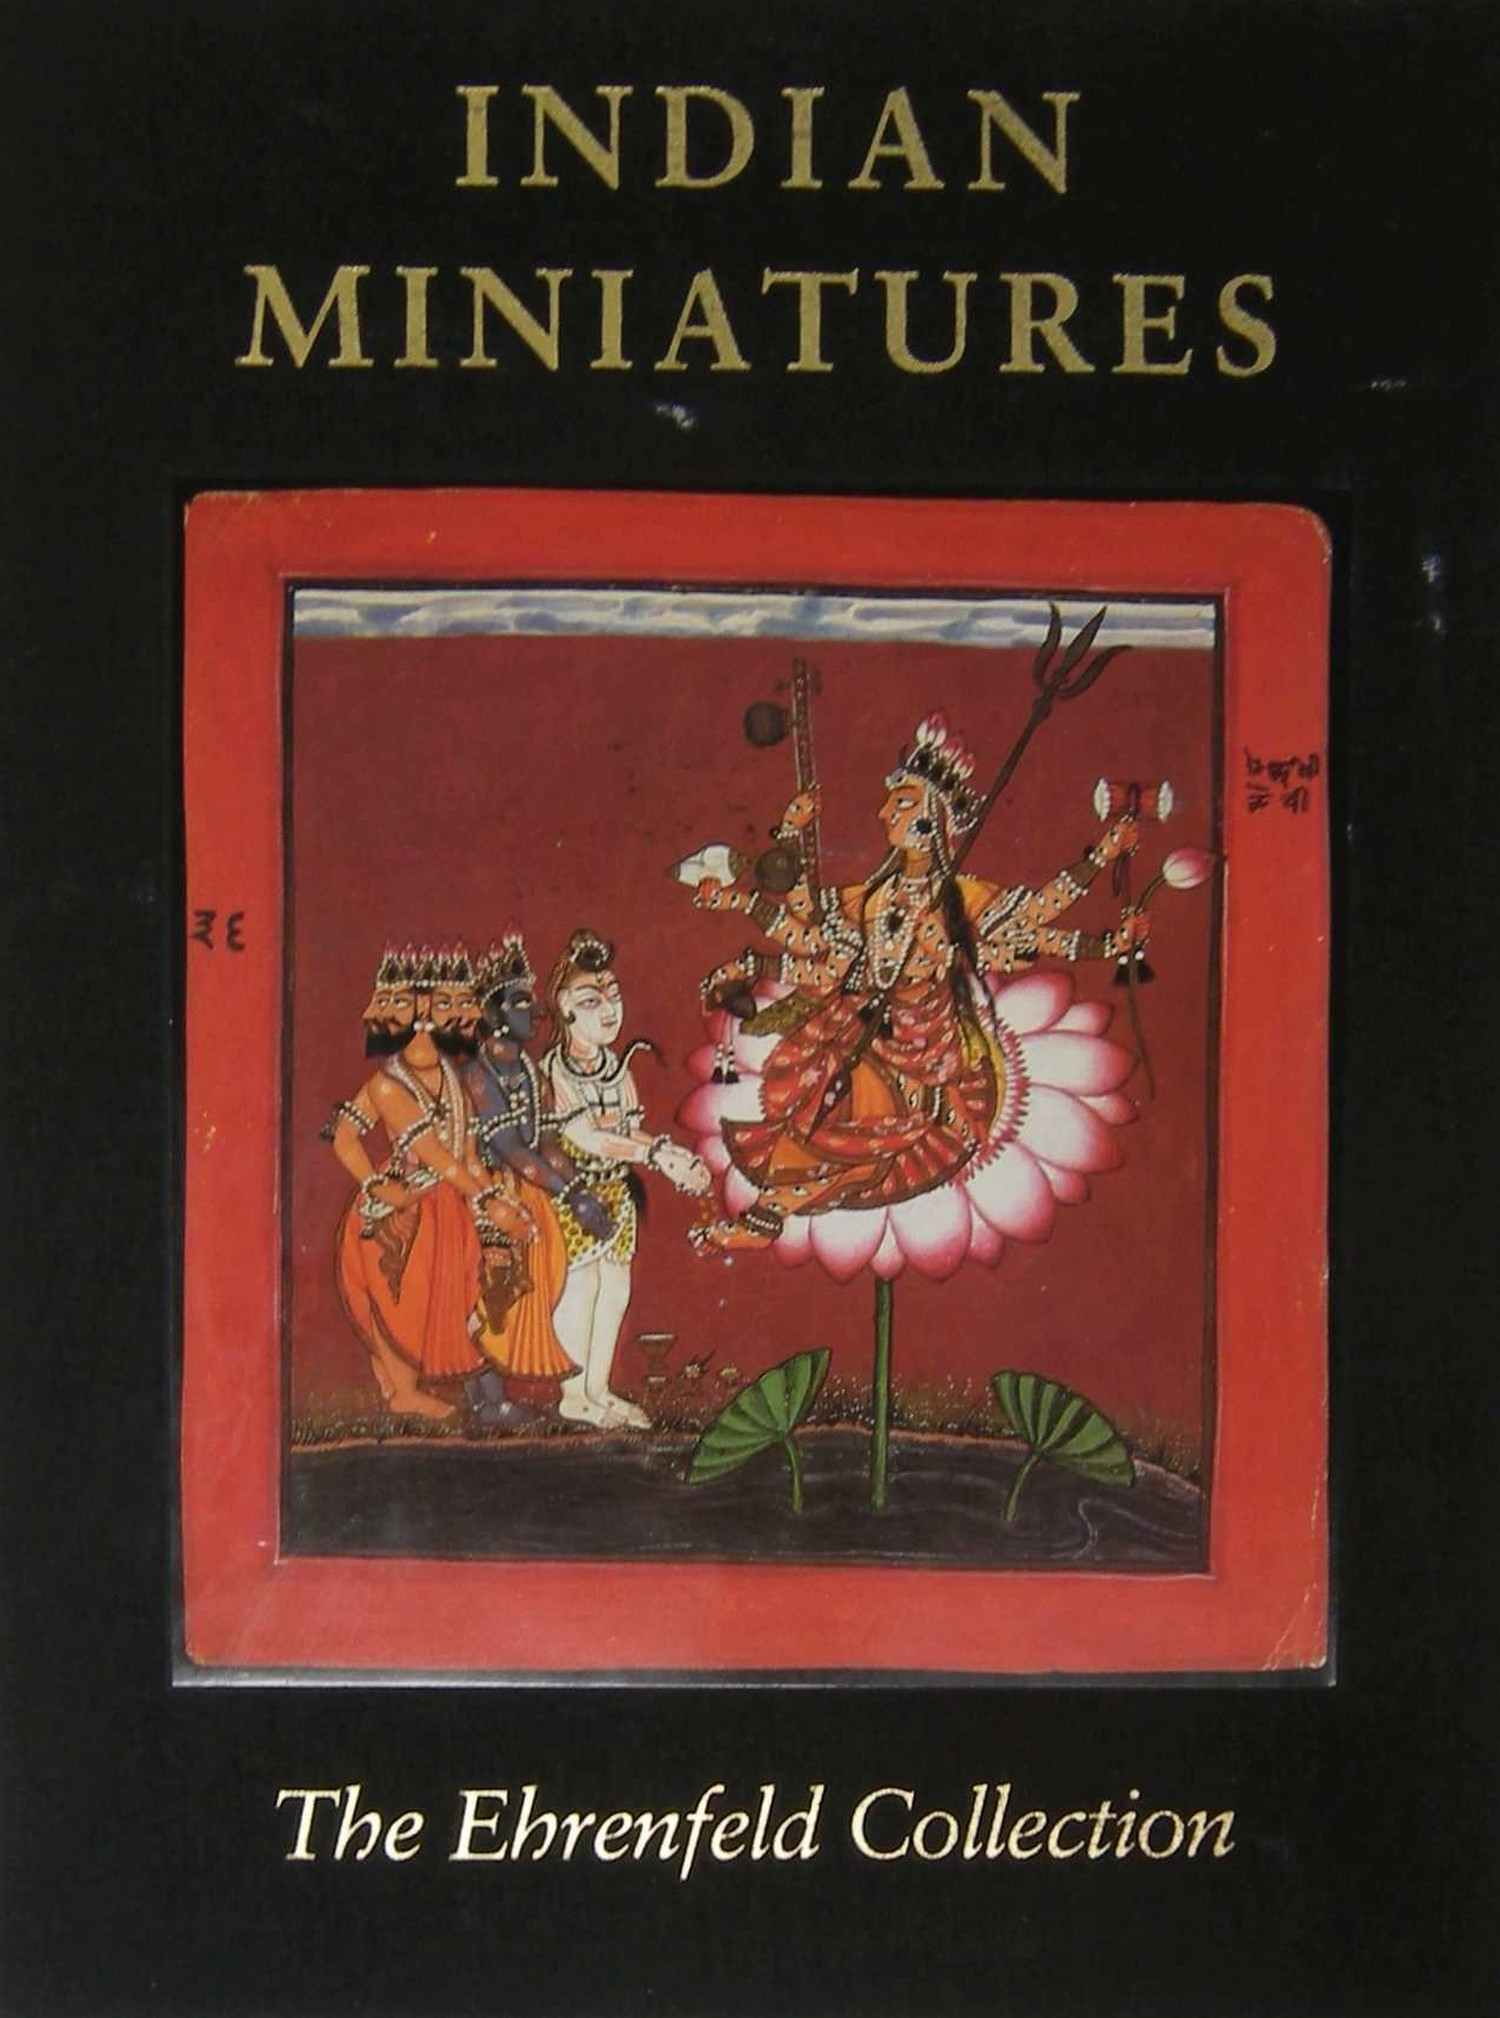 Indian Miniatures: The Ehrenfeld Collection by Daniel J. Ehnbom 